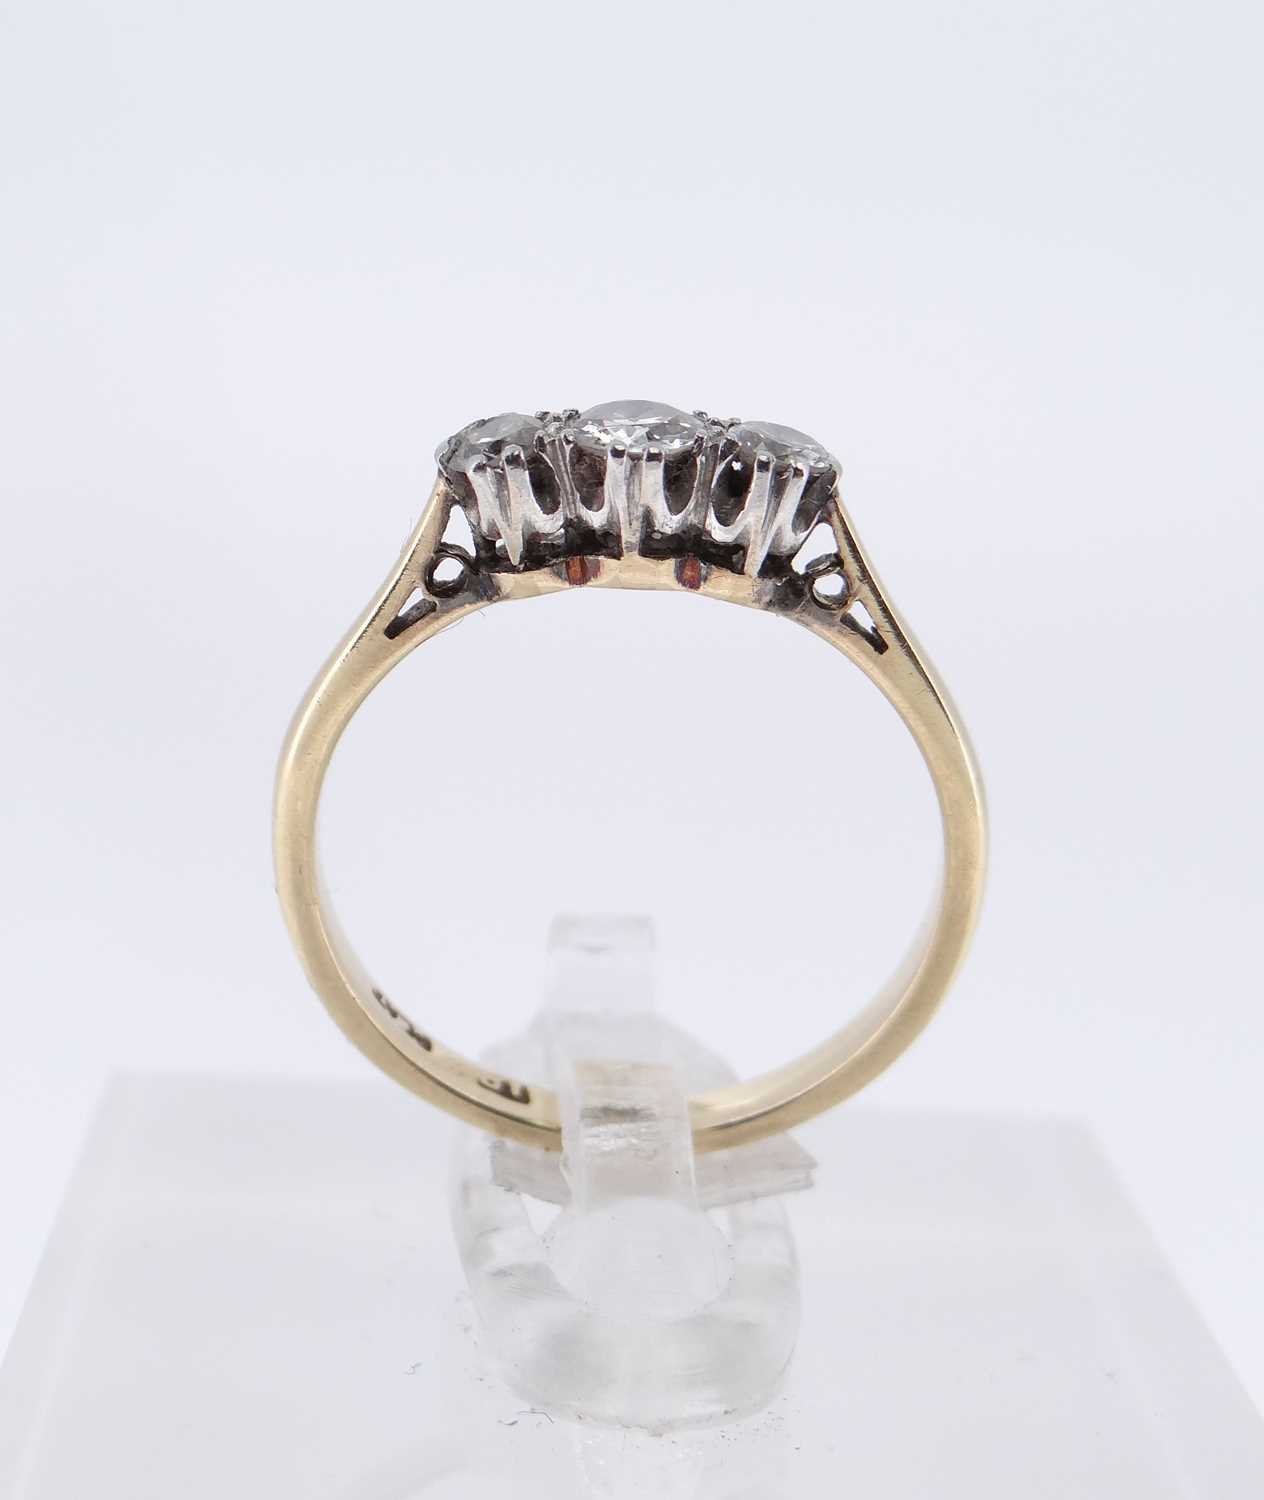 18CT GOLD & PLATINUM THREE STONE DIAMOND RING, 0.3cts total approx., ring size M / N, 2.6gms, in - Image 2 of 2